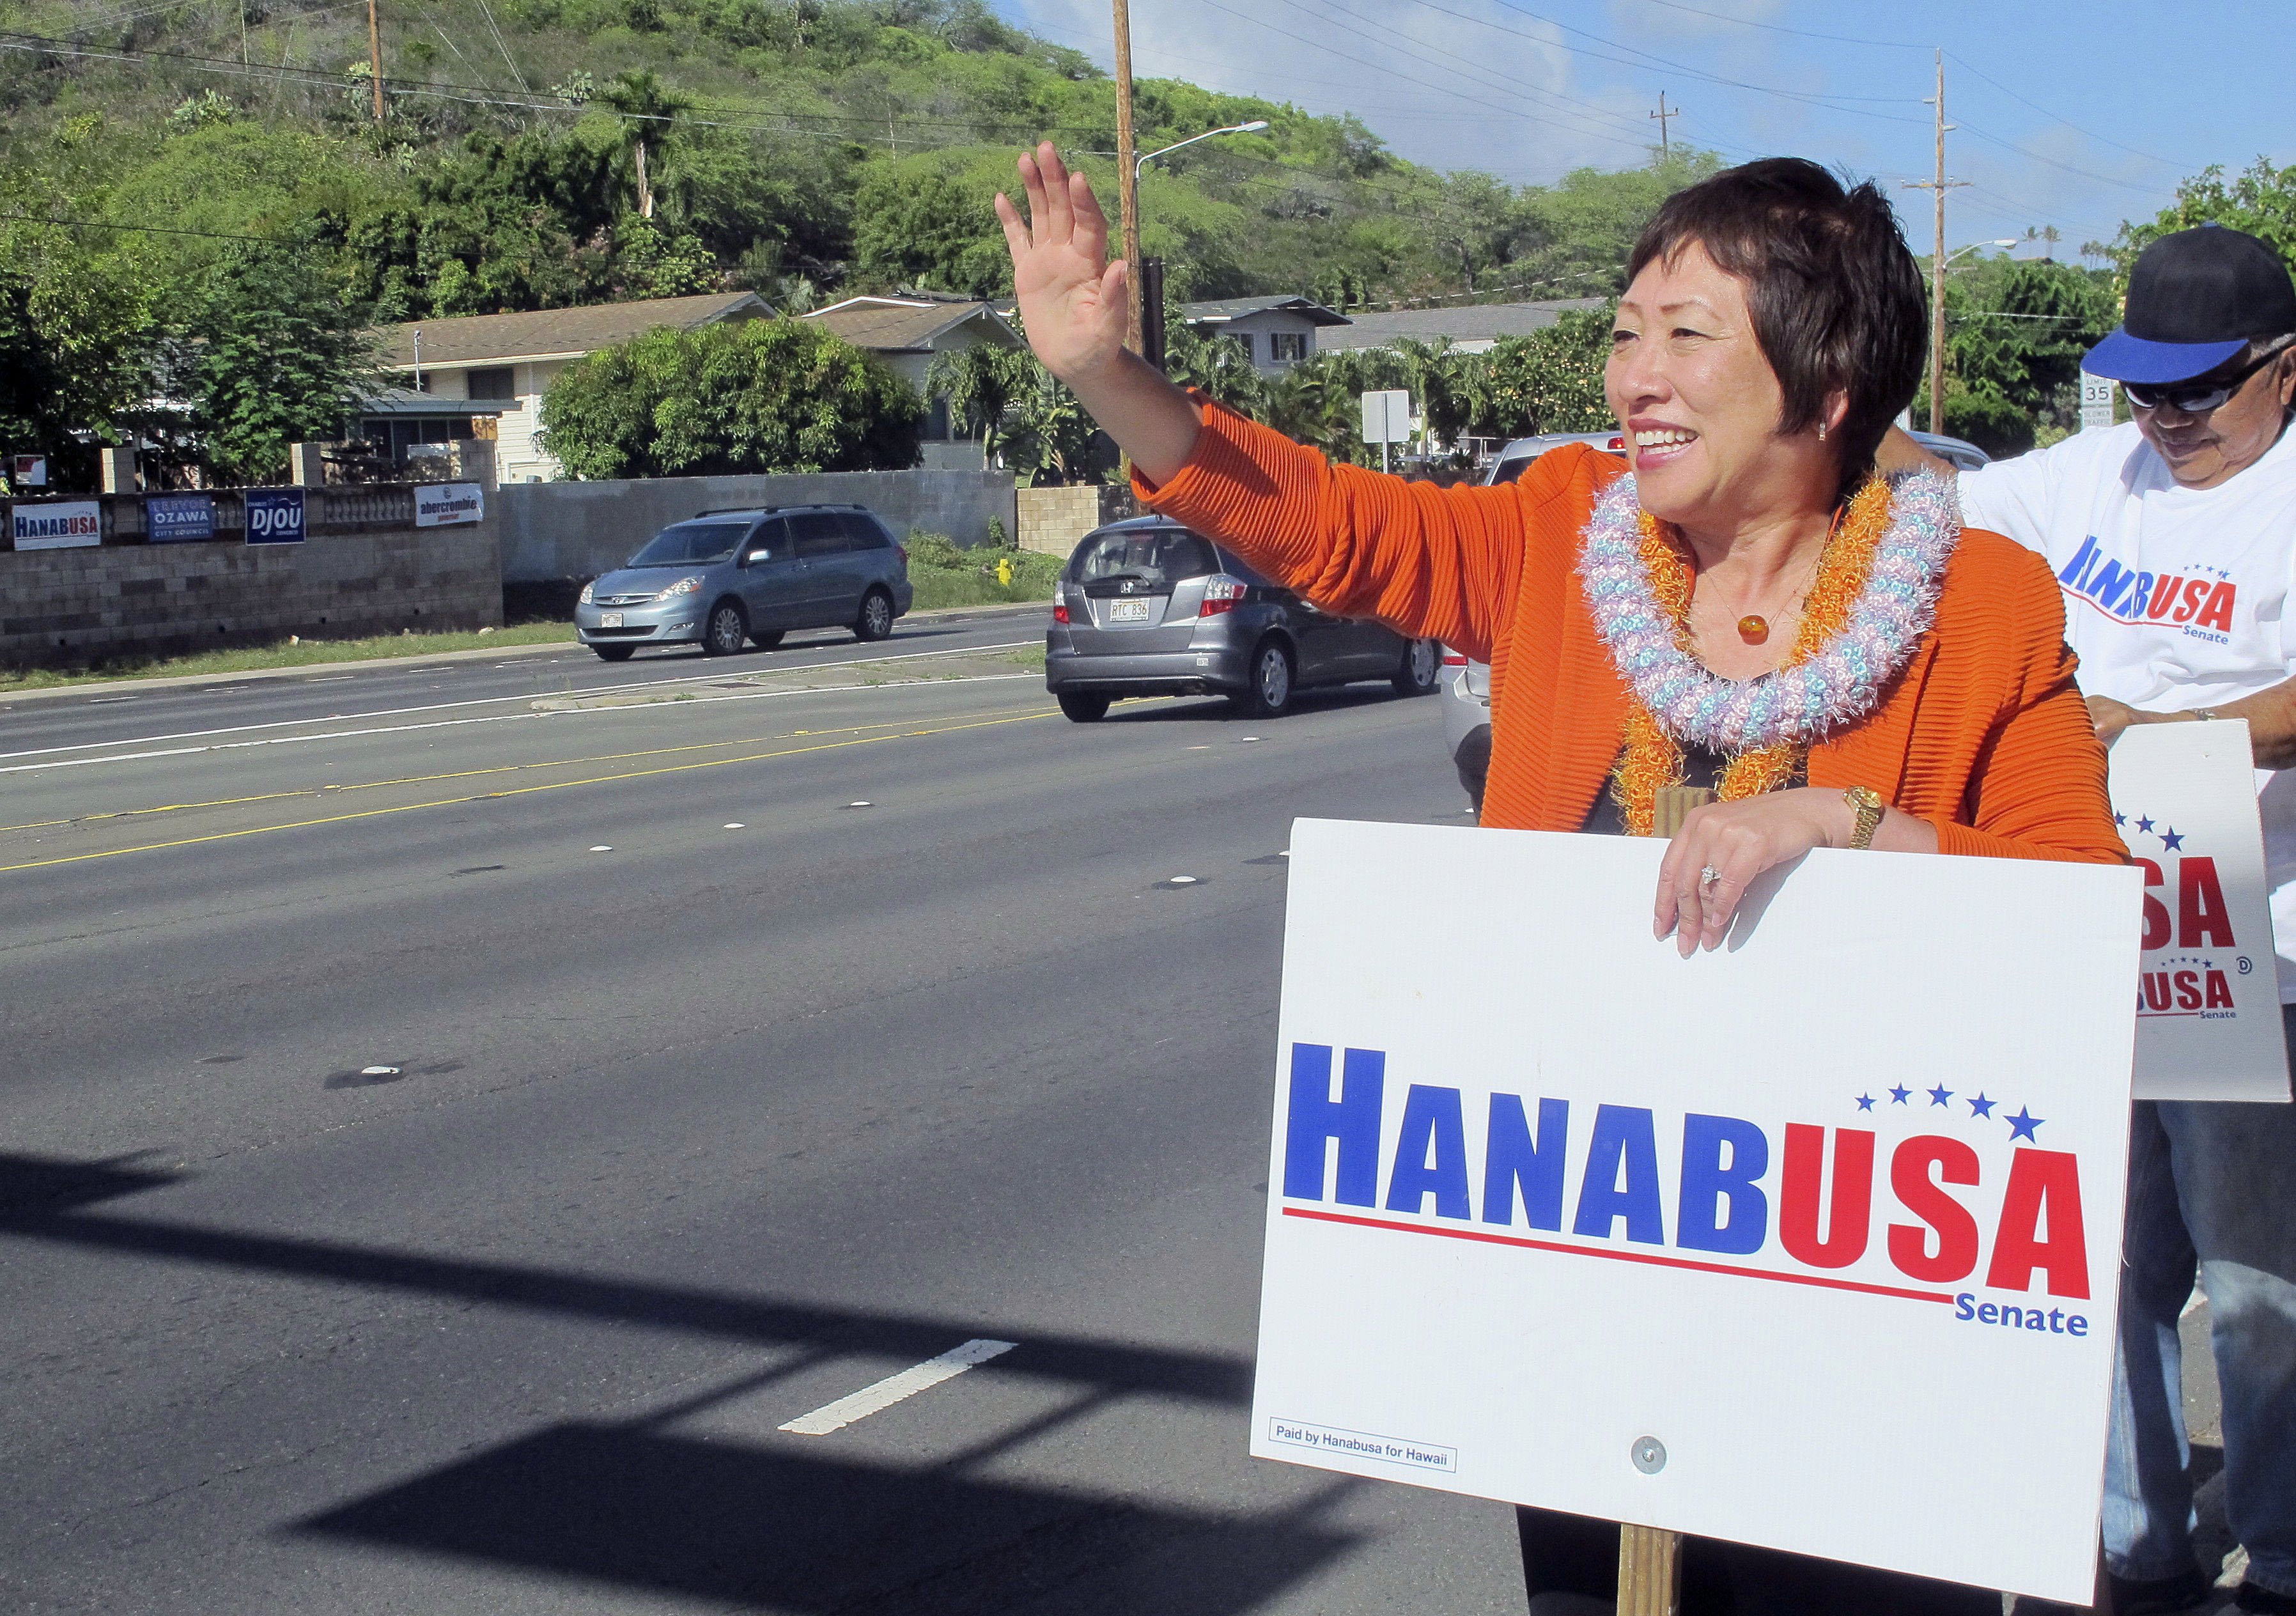 U.S. Rep. Colleen Hanabusa waves at drivers while campaigning for U.S. Senate in Honolulu on Aug. 4, 2014. (Audrey McAvoy—AP)